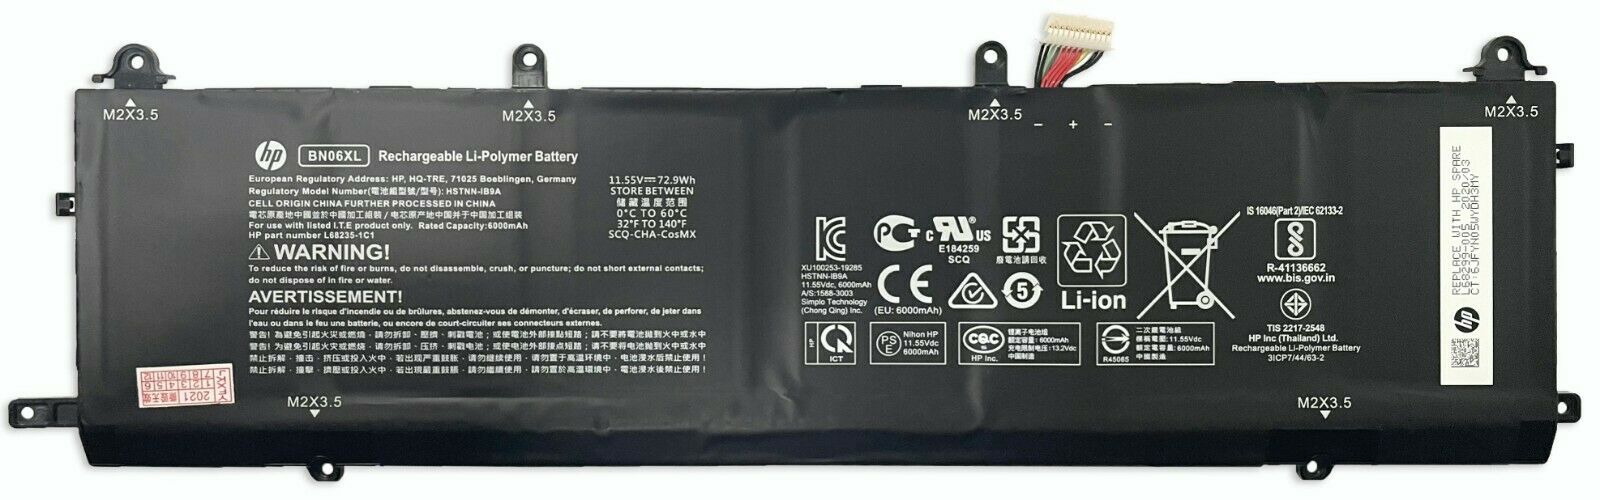 HP Spectre x360 15-eb0020ca Battery 6-cell 72.9Wh